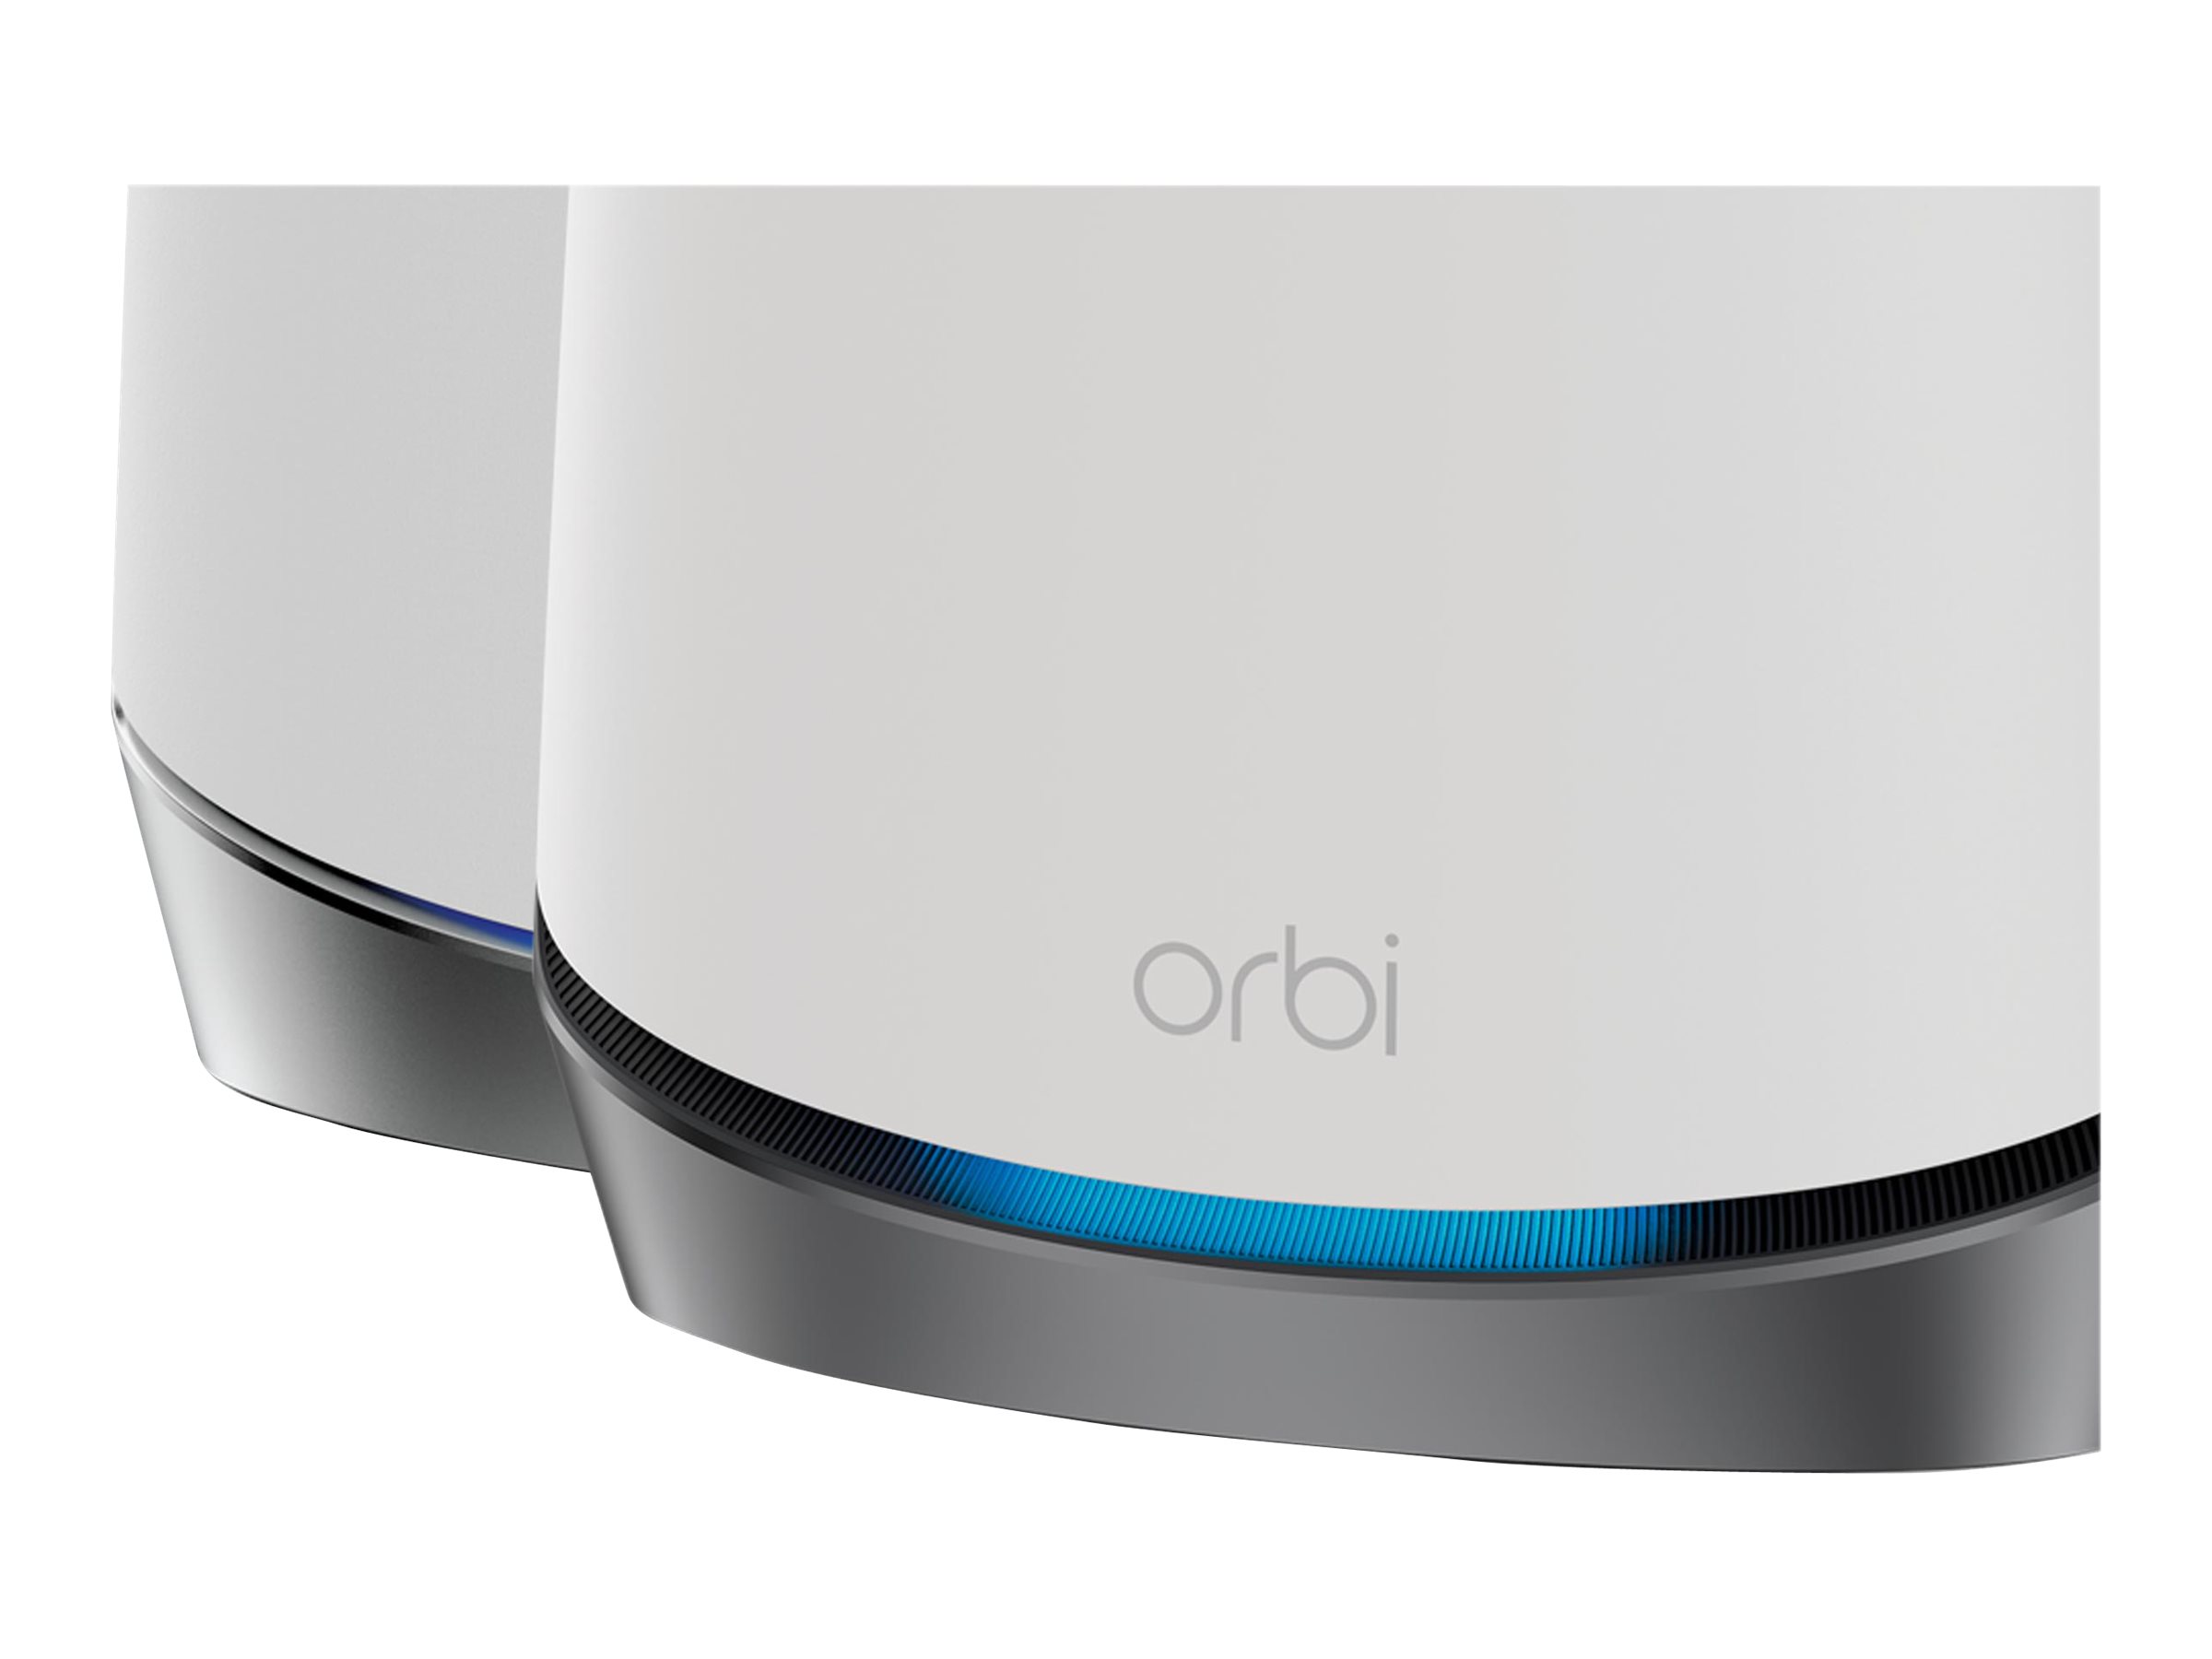 NETGEAR Orbi 5G Tri-Band WiFi 6 Mesh System (NBK752) – Router with 1 Satellite Extender | Coverage up to 5,000 sq. ft, 40 Devices | AX4200 (Up to 4.2Gbps) NBK752-100NAS UPC  - NETGEAR